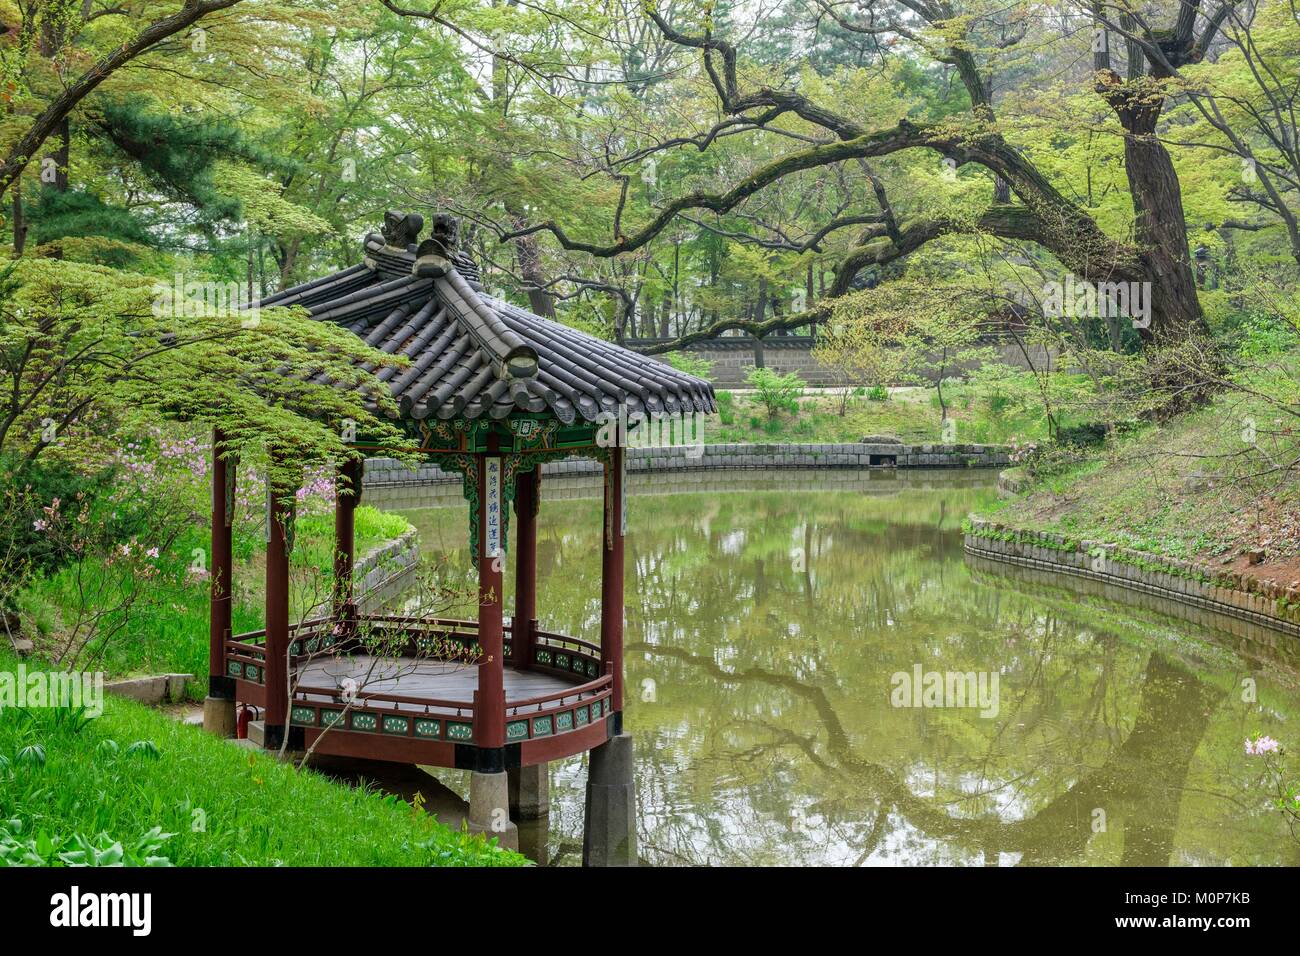 South Korea,Seoul,Jongno-gu district,Changdeokgung palace or Prospering Virtue Palace built in the 15th century during the Joseon Dynasty,Huwon garden or secret garden (UNESCO World Heritage site) Stock Photo